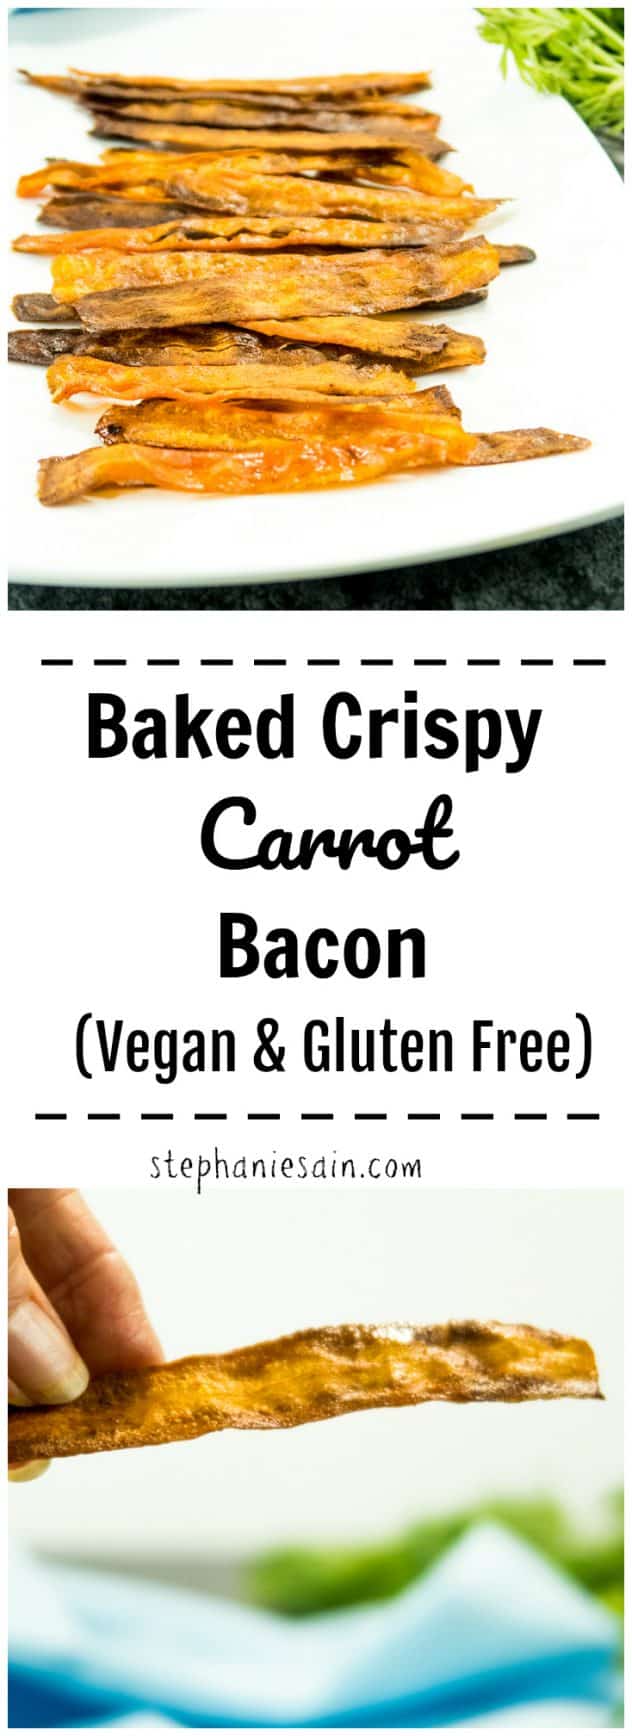 This Baked Crispy Carrot Bacon is smokey, slightly sweet & crispy. Carrot strips thinly sliced & marinated then baked. Perfect for sandwiches, salad toppings and so much more. Vegan & Gluten Free.